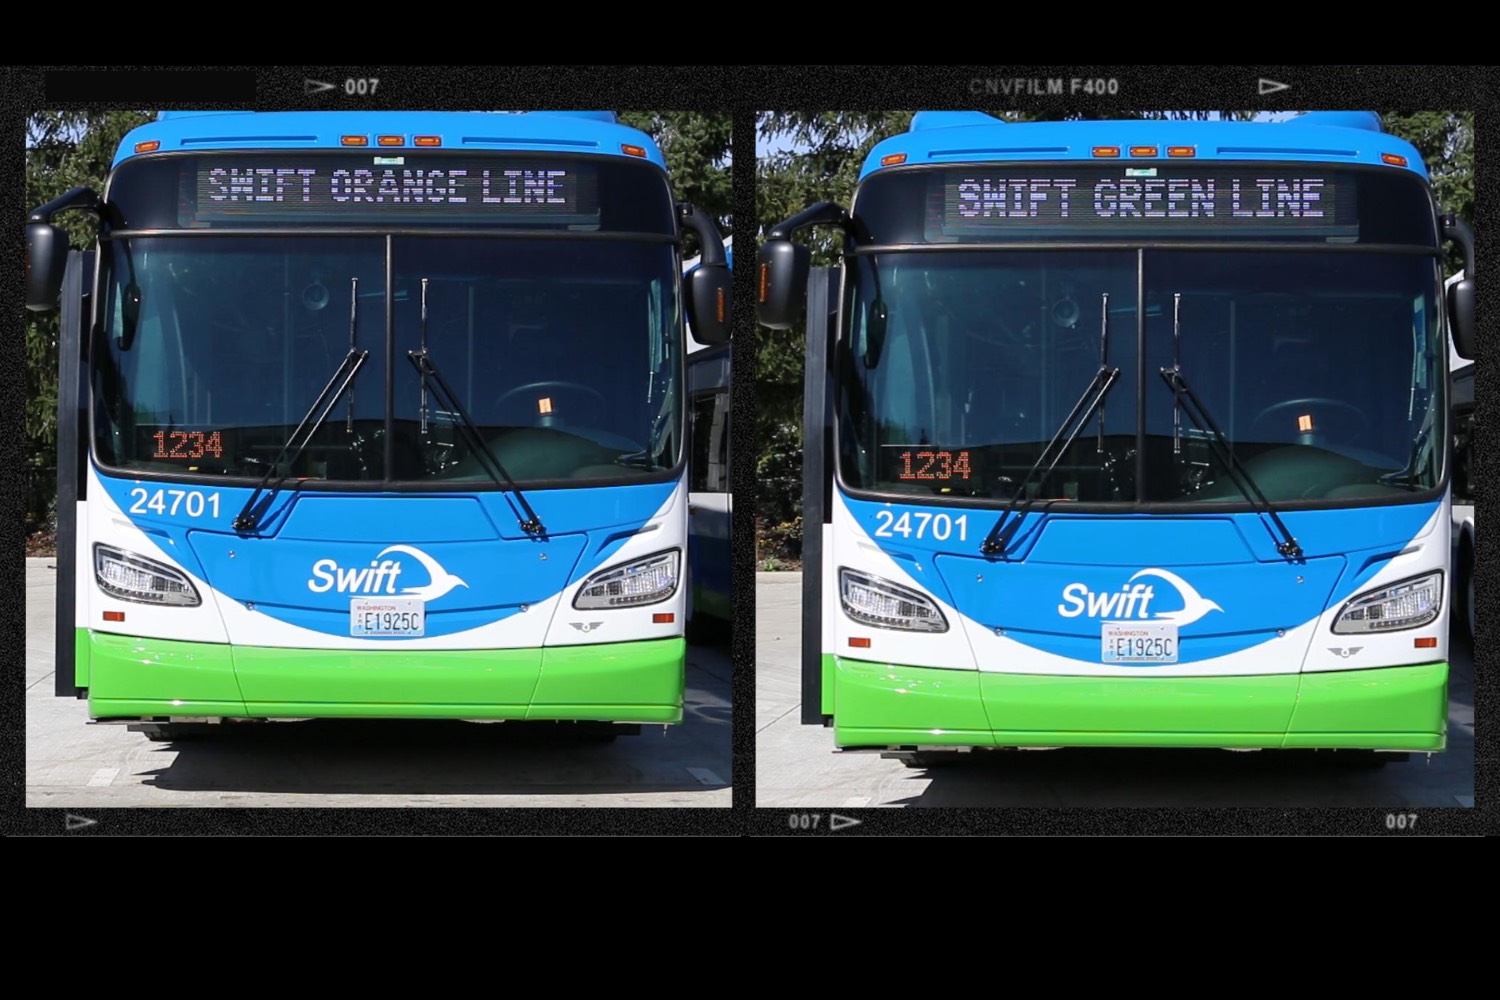 Two Swift buses with 